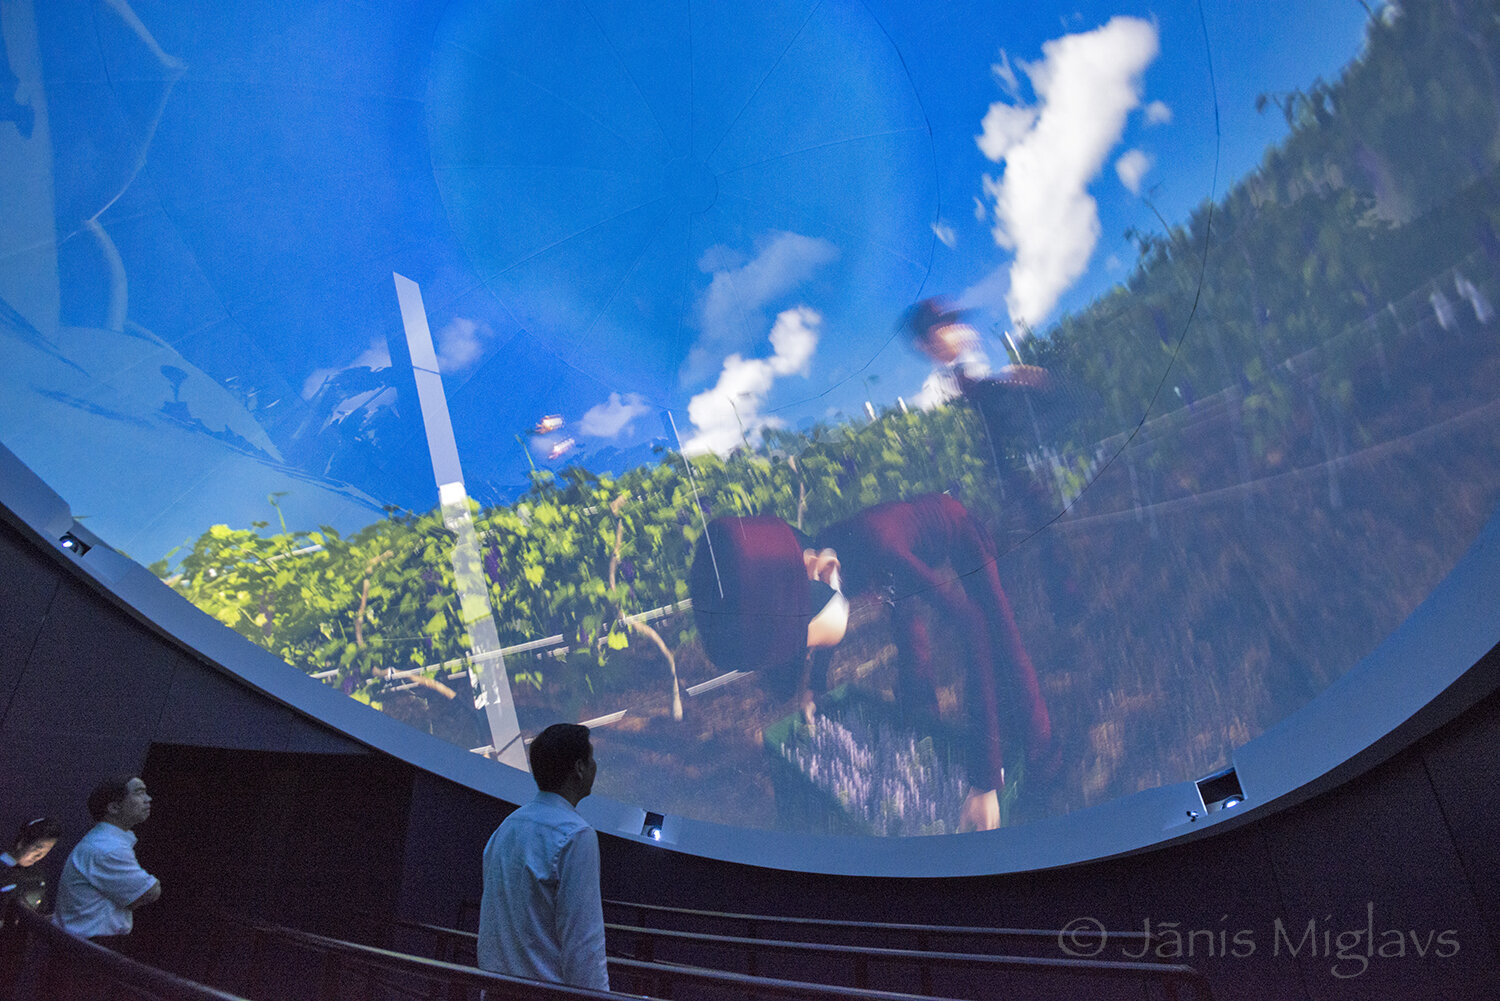 The IMAX-like dome theater shows how wine is made at Chateau Moser XV winery.